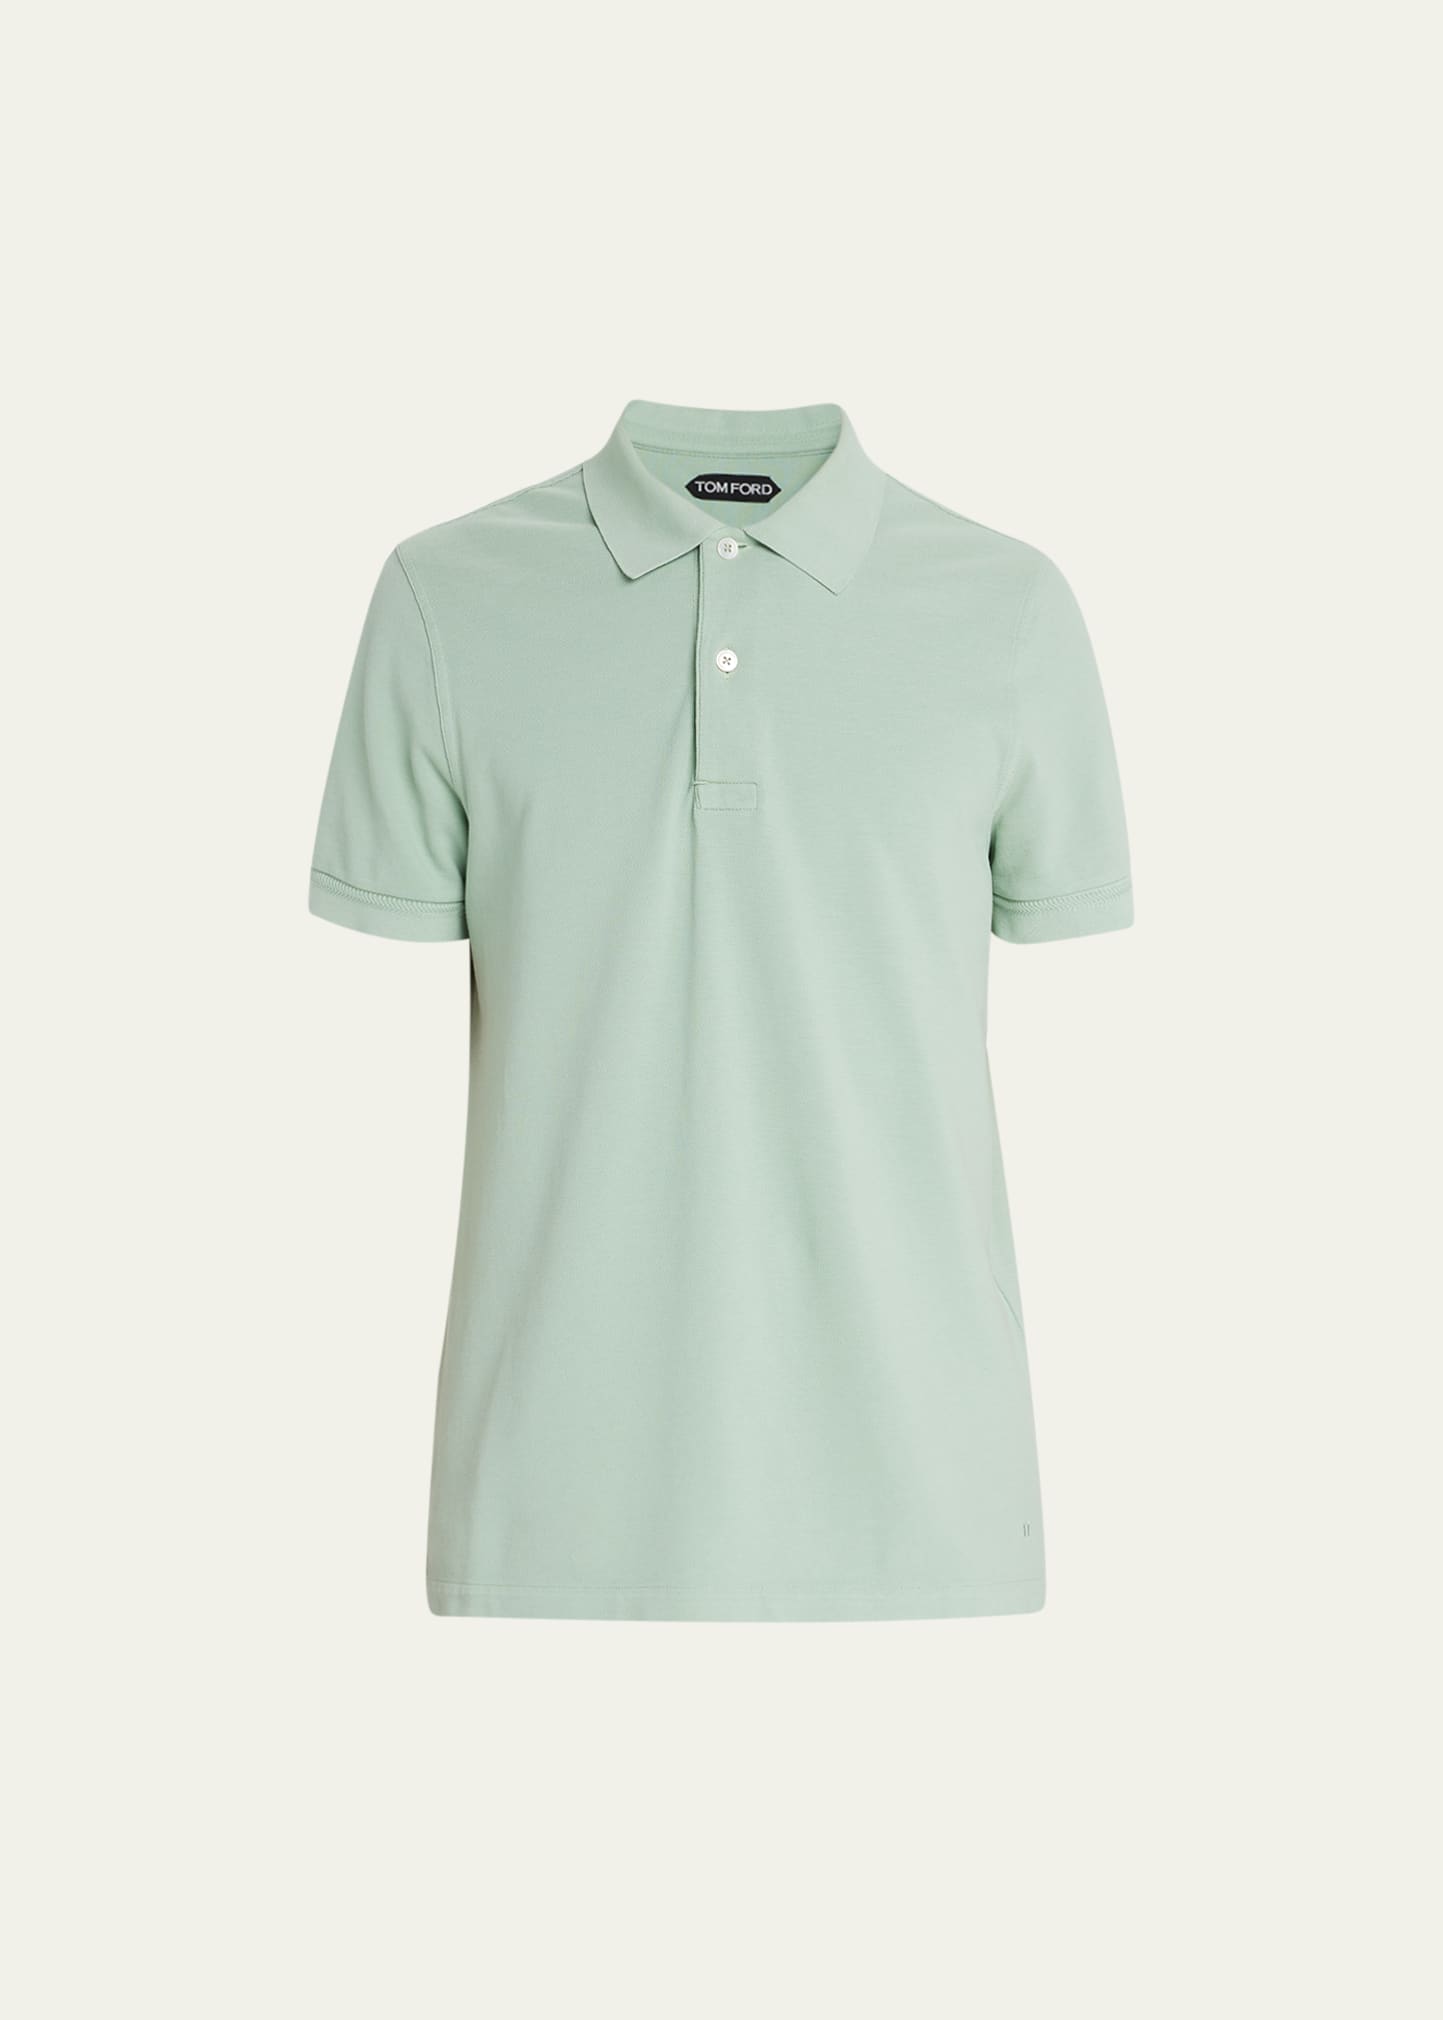 Tom Ford Men's Cotton Pique Polo Shirt In Mint